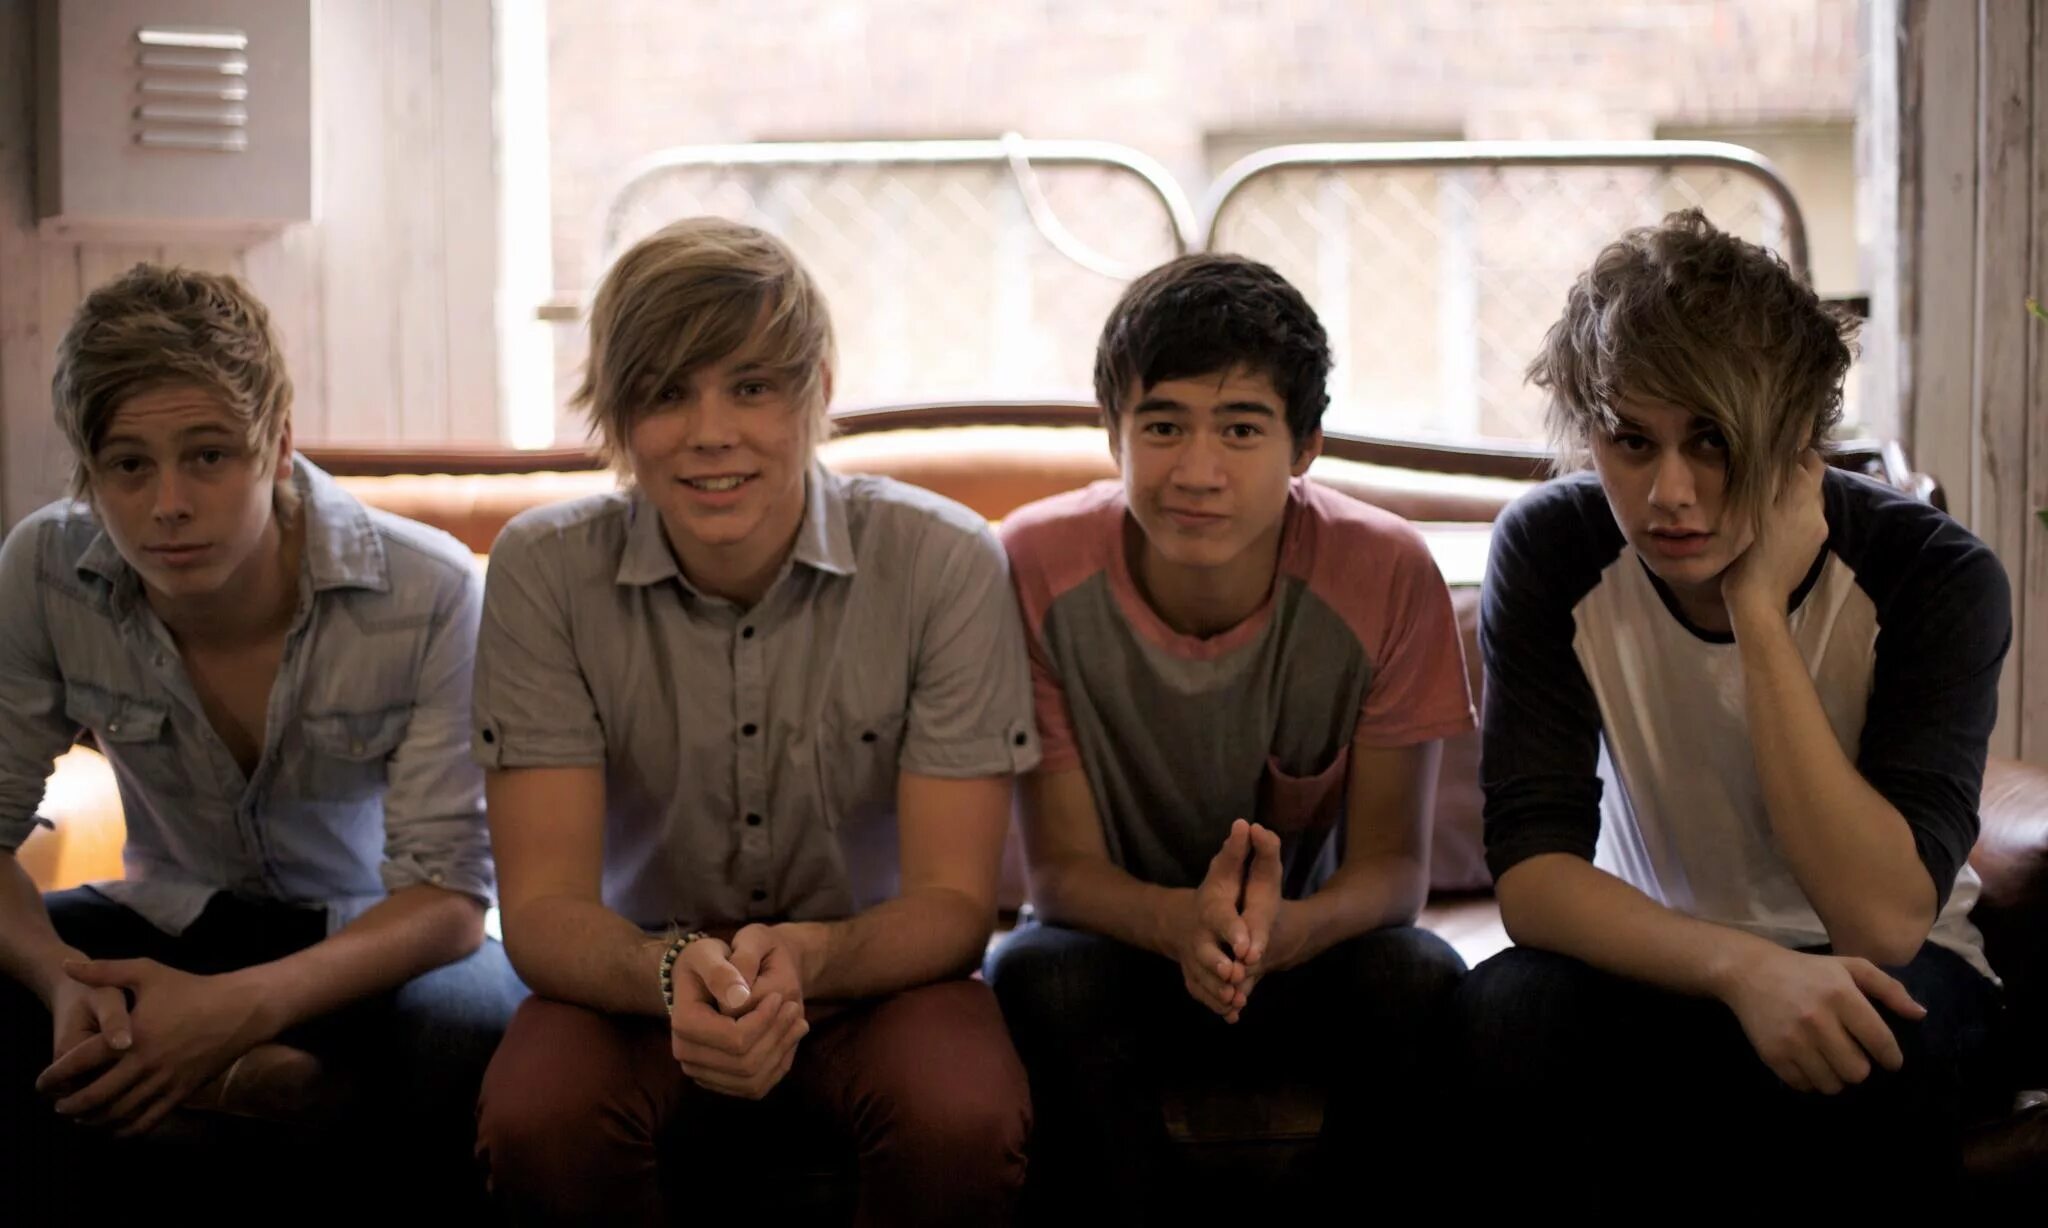 5 Seconds of Summer. 5 Seconds of Summer 2011. 5 Секунд до солнца. 5 Секунд вечности. 5 мая 23 года